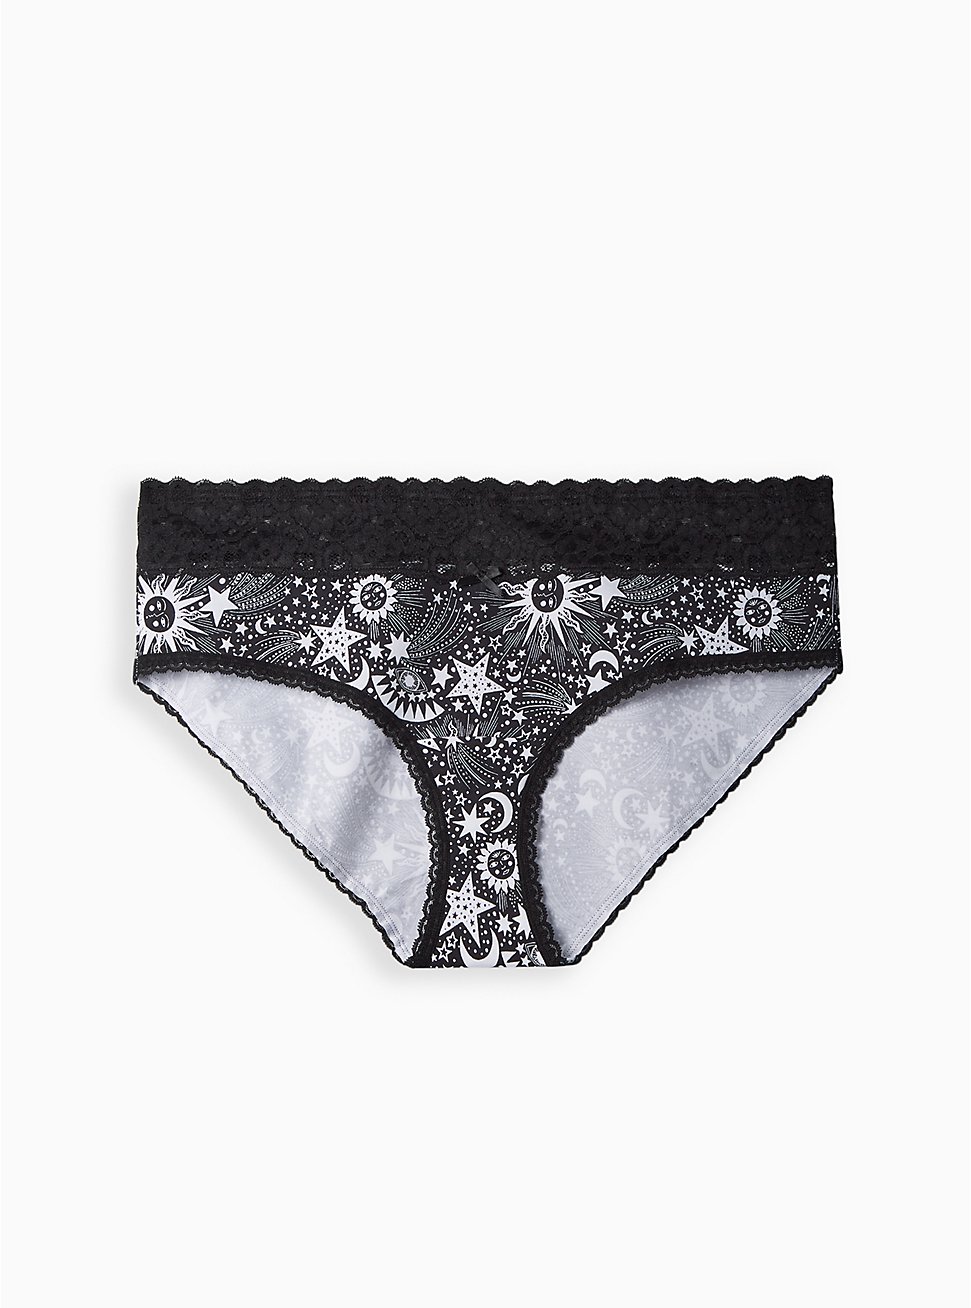 Wide Lace Hipster Panty - Cotton Celestial Black, HEART OF GOLD BLACK, hi-res